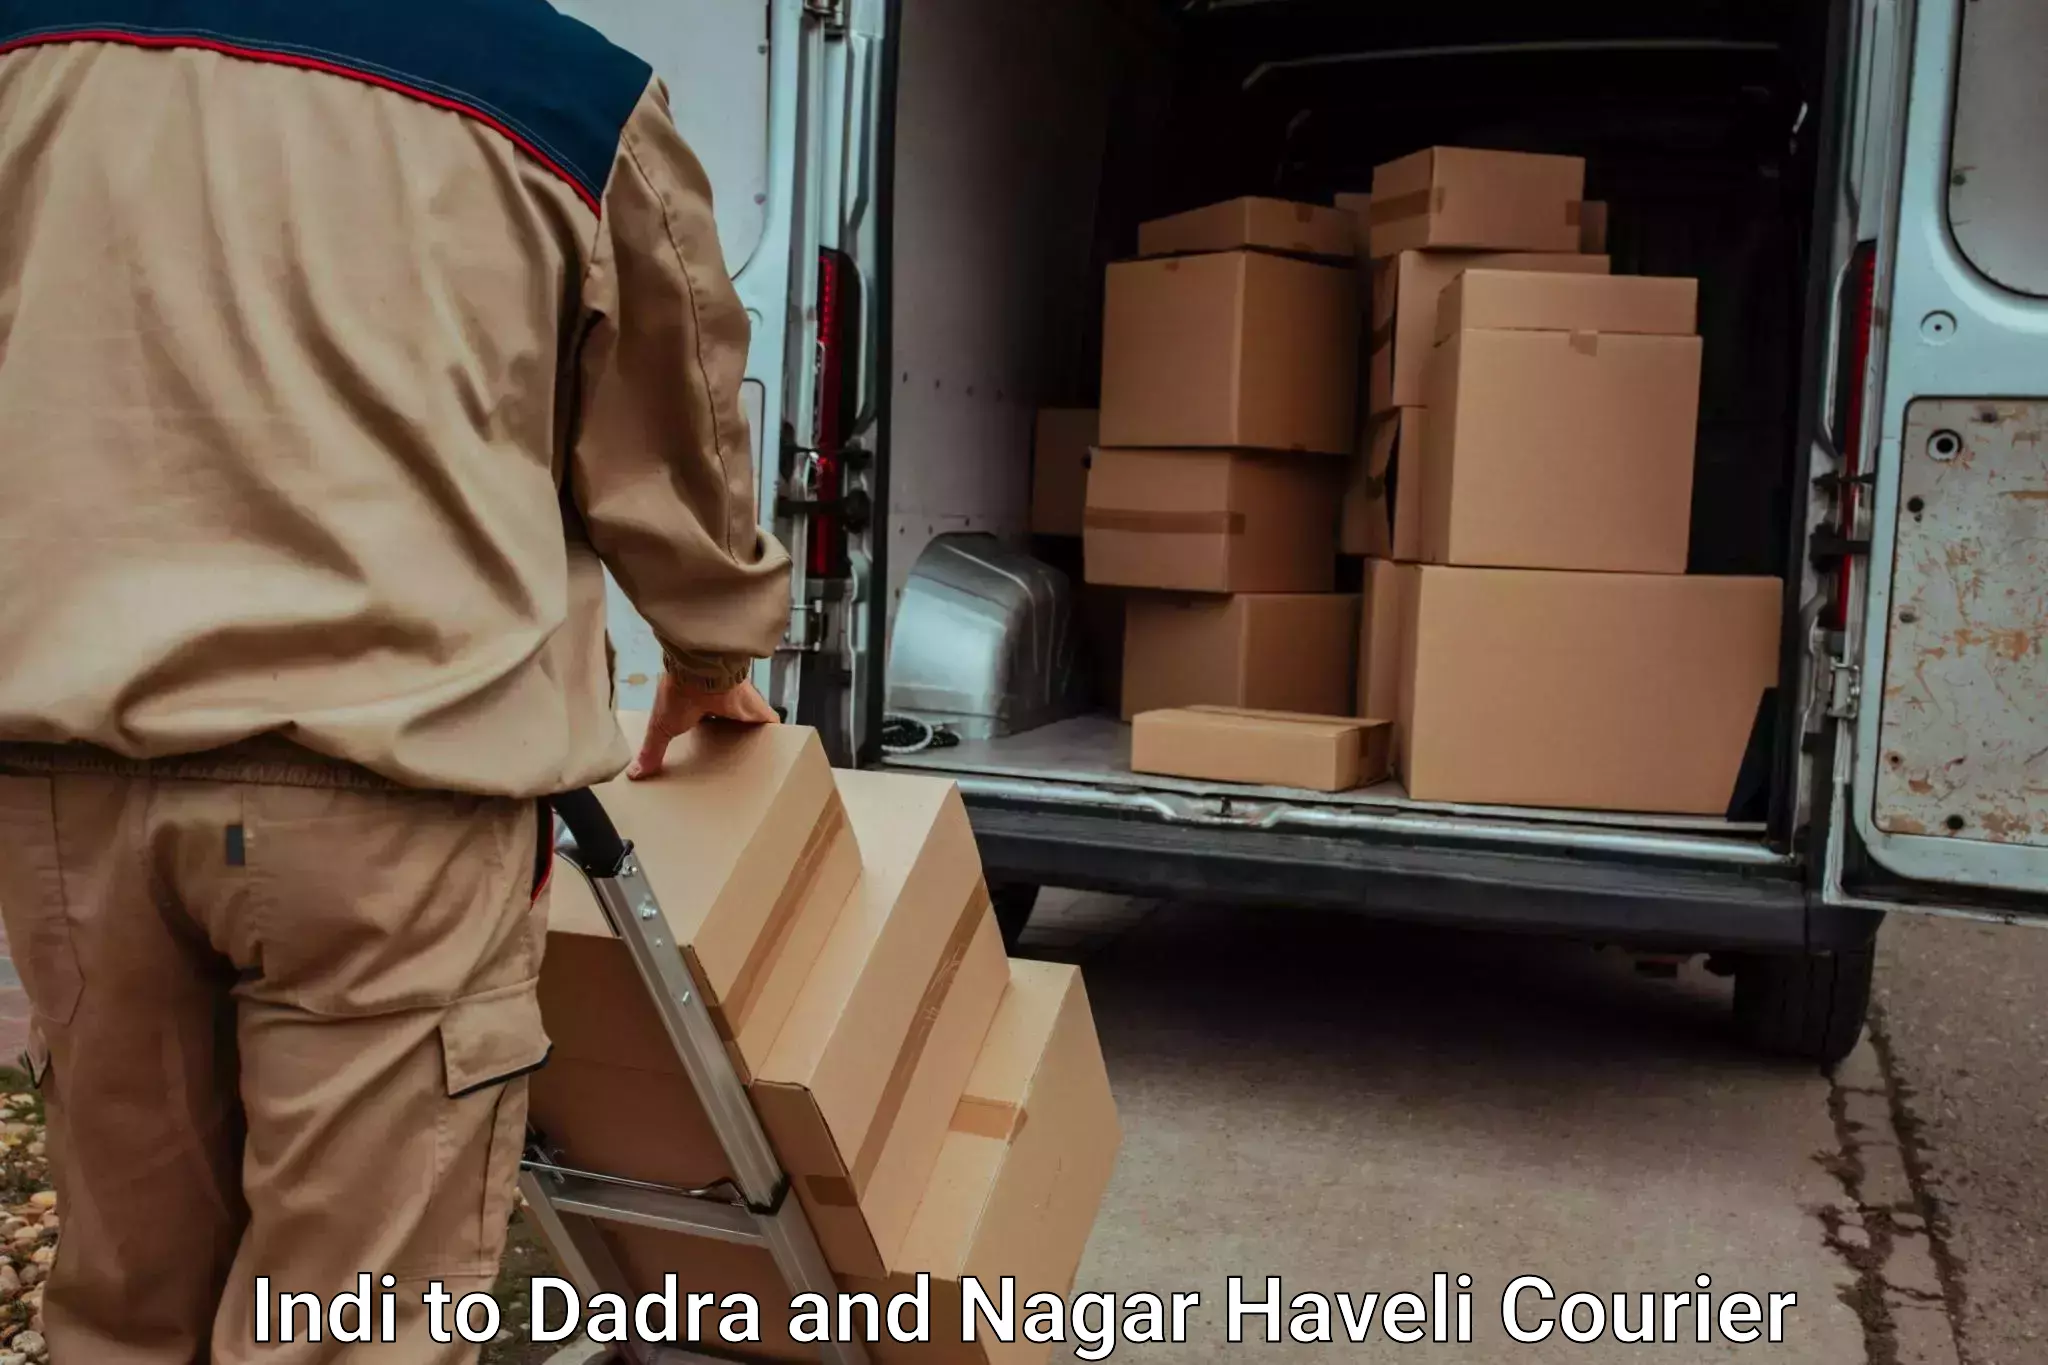 Specialized moving company Indi to Dadra and Nagar Haveli